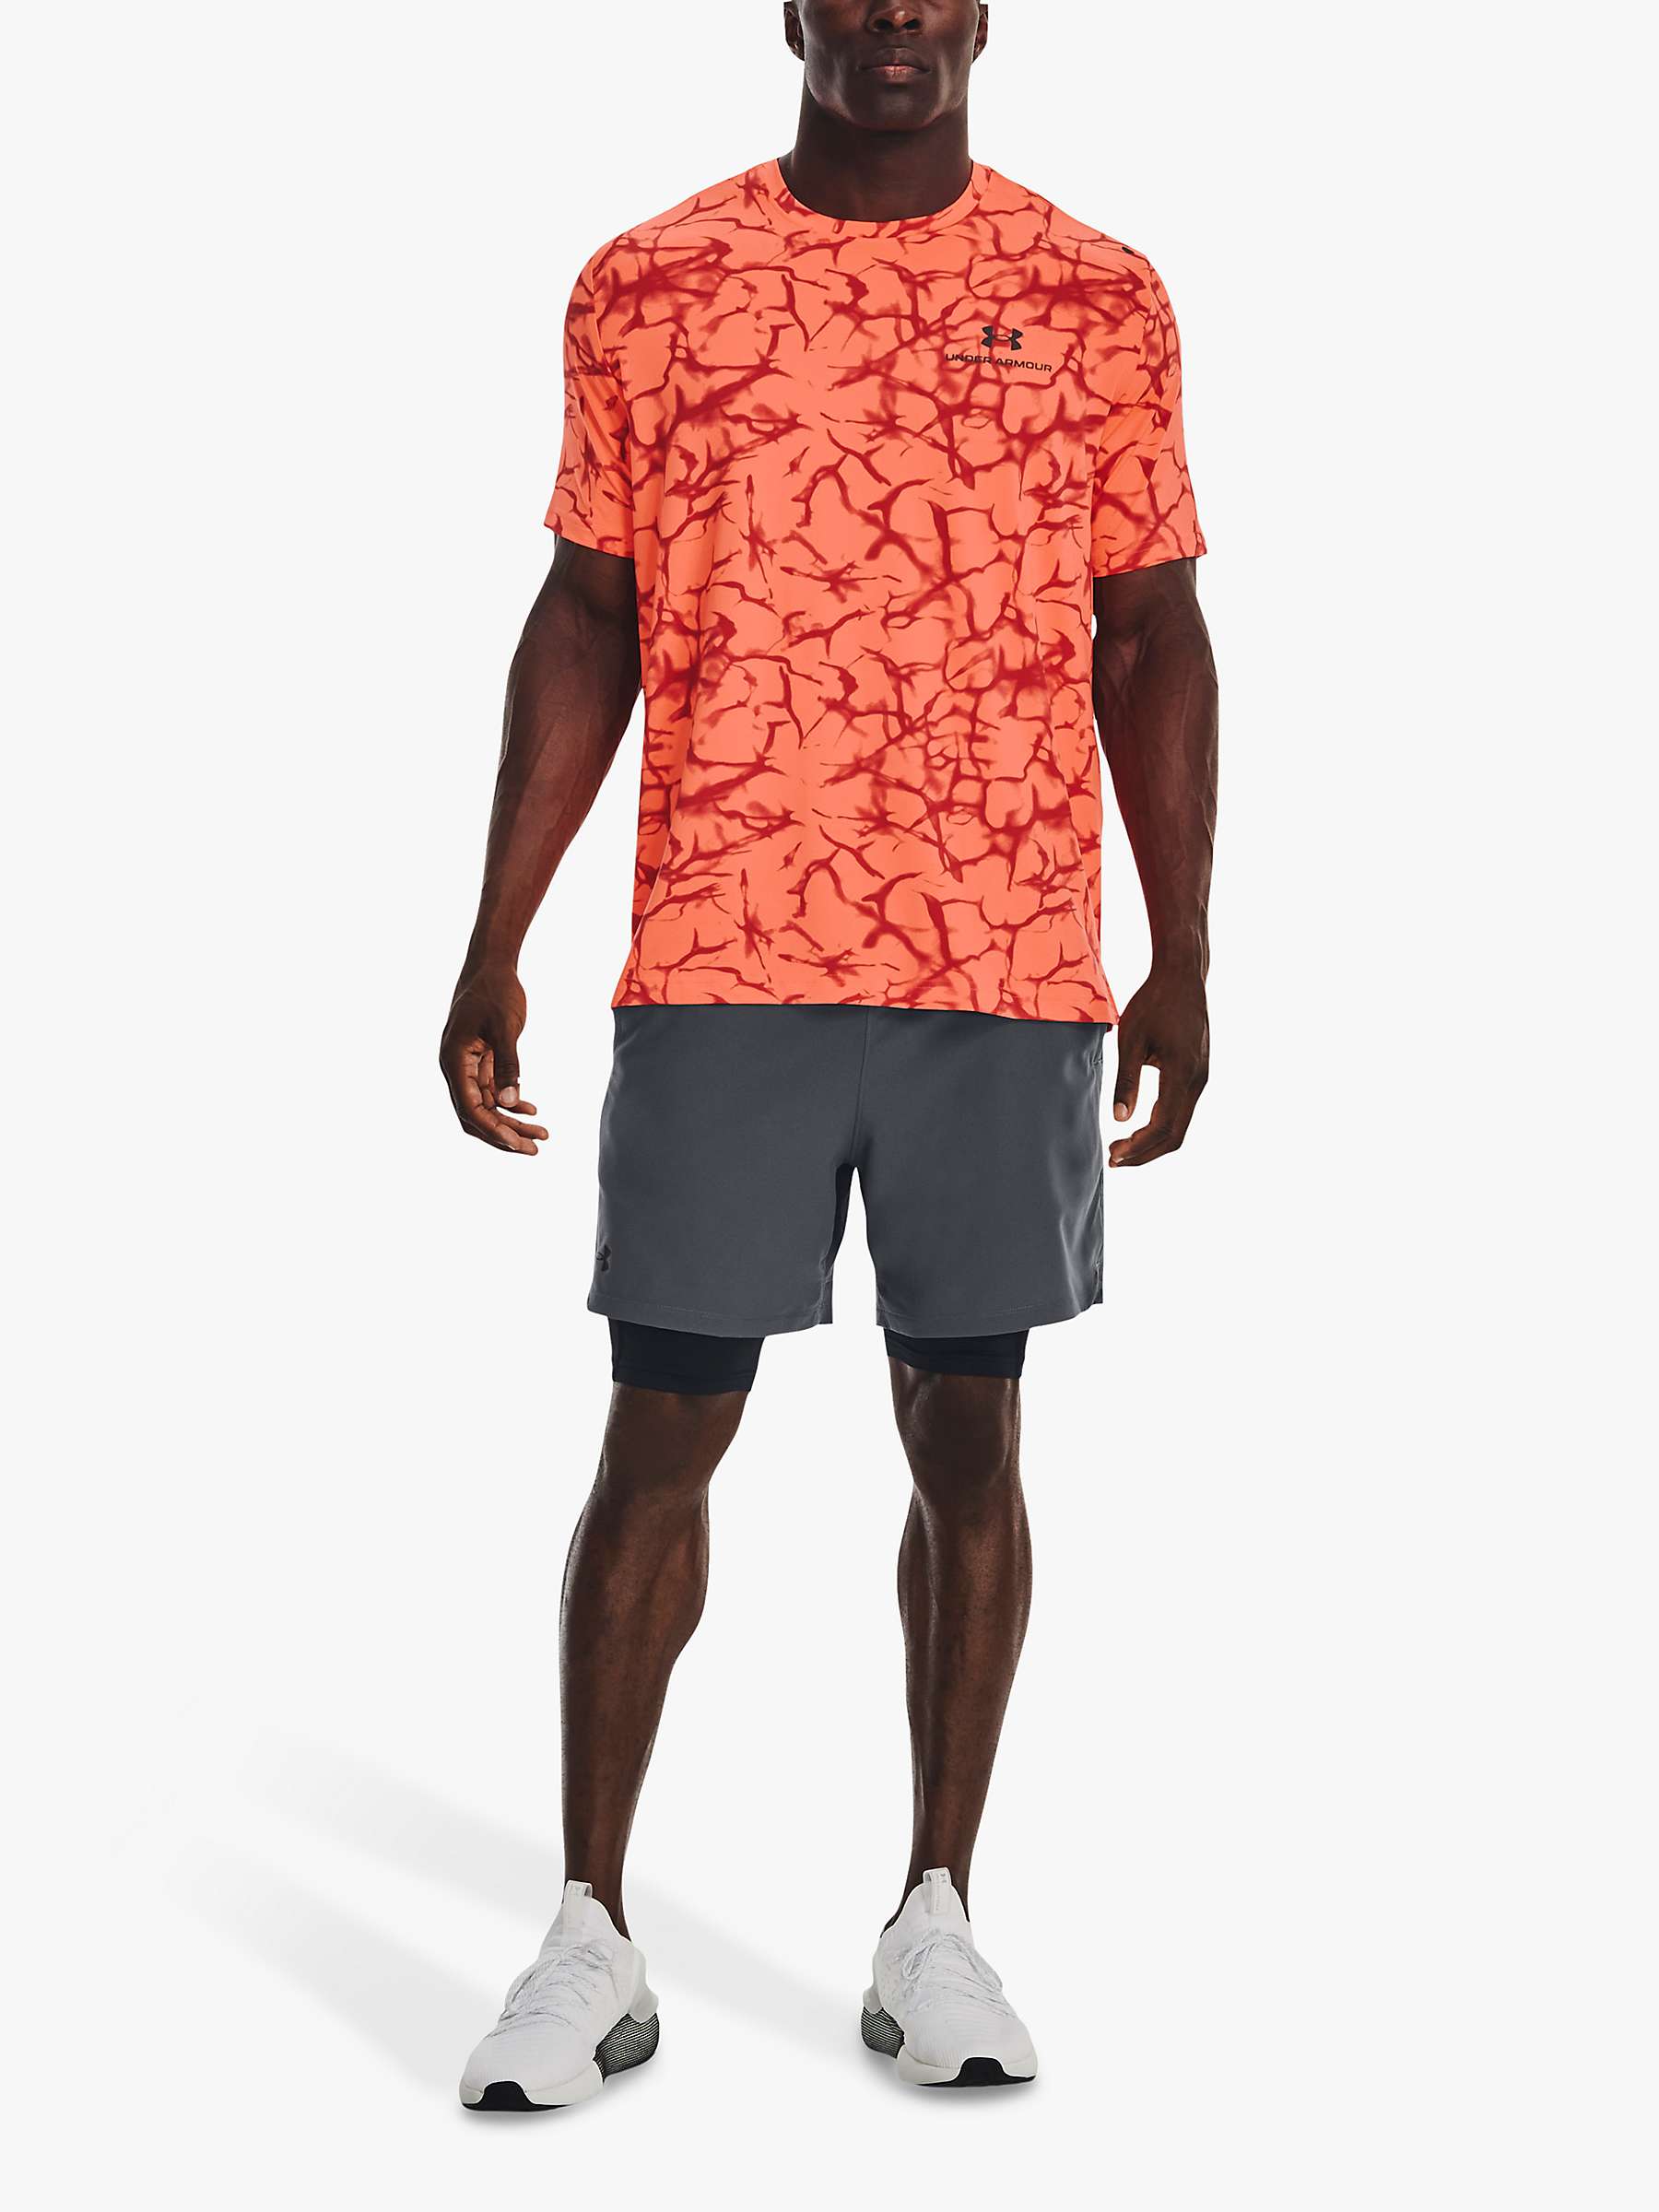 Buy Under Armour Vanish Woven 2-in-1 Gym Shorts Online at johnlewis.com